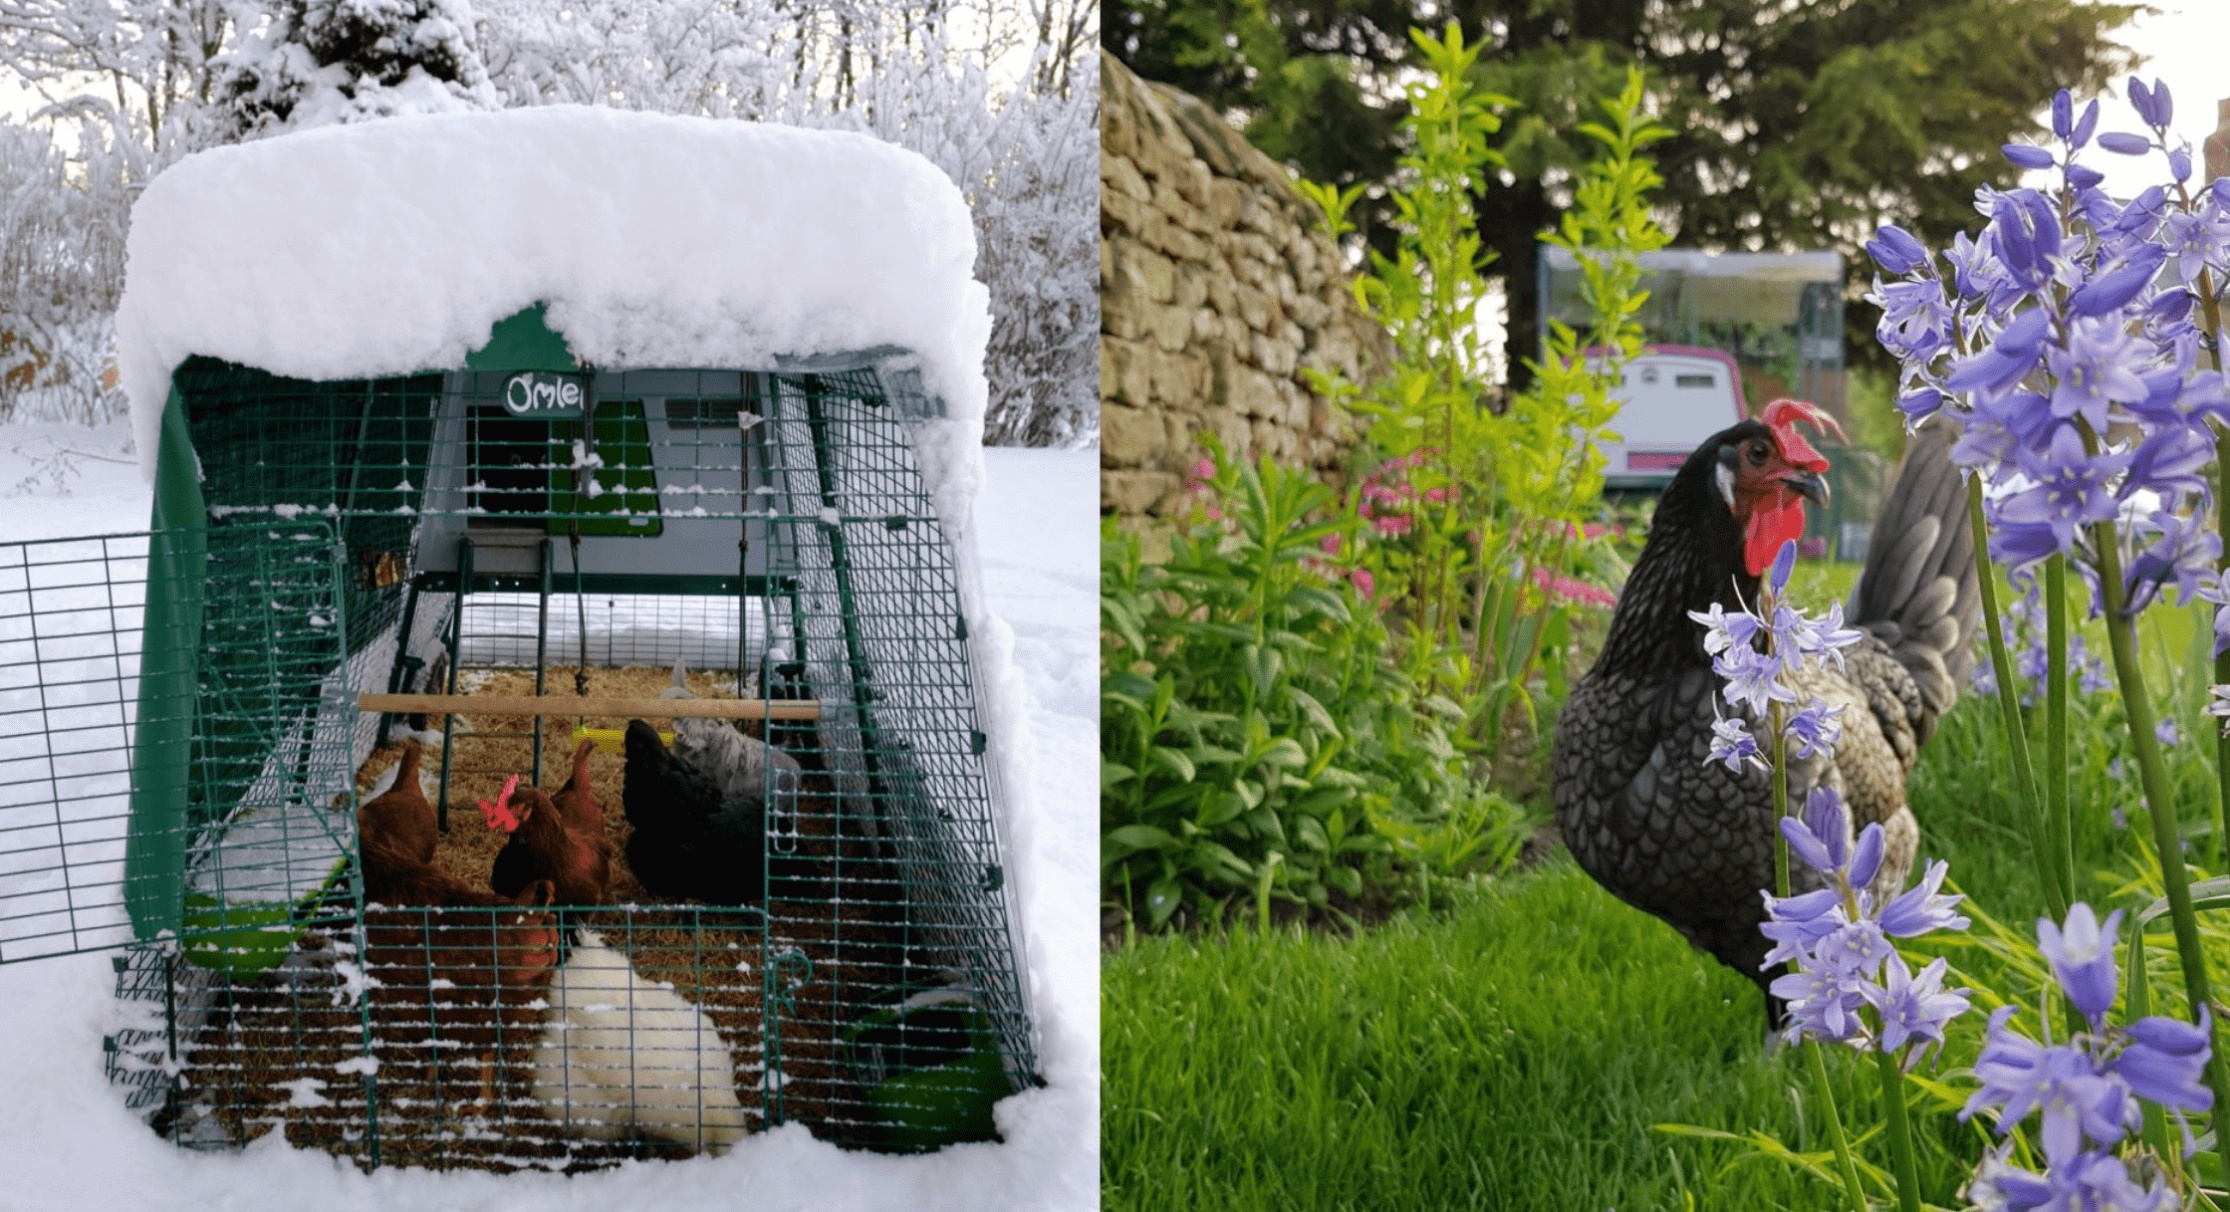 A snowy Omlet Eglu chicken coop and a chicken stood next to a purple spring flower